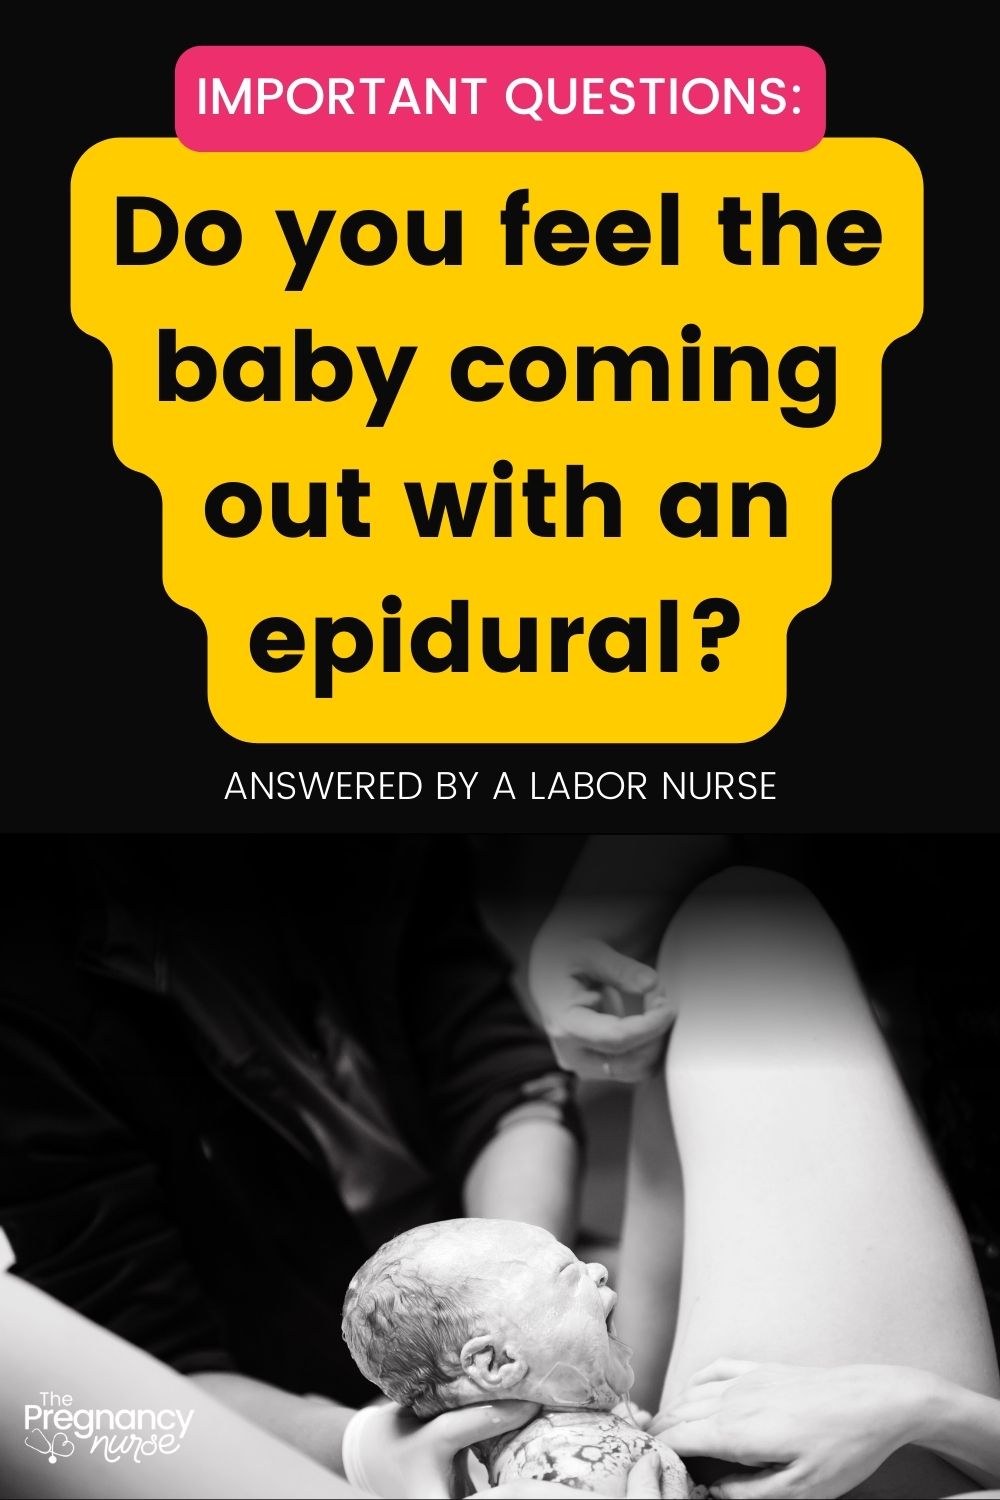 Can you feel labor pains when you get an epidural? How much pain relief will you get from contractions with your epidural for labor? What to expect with pain management from anesthesia?